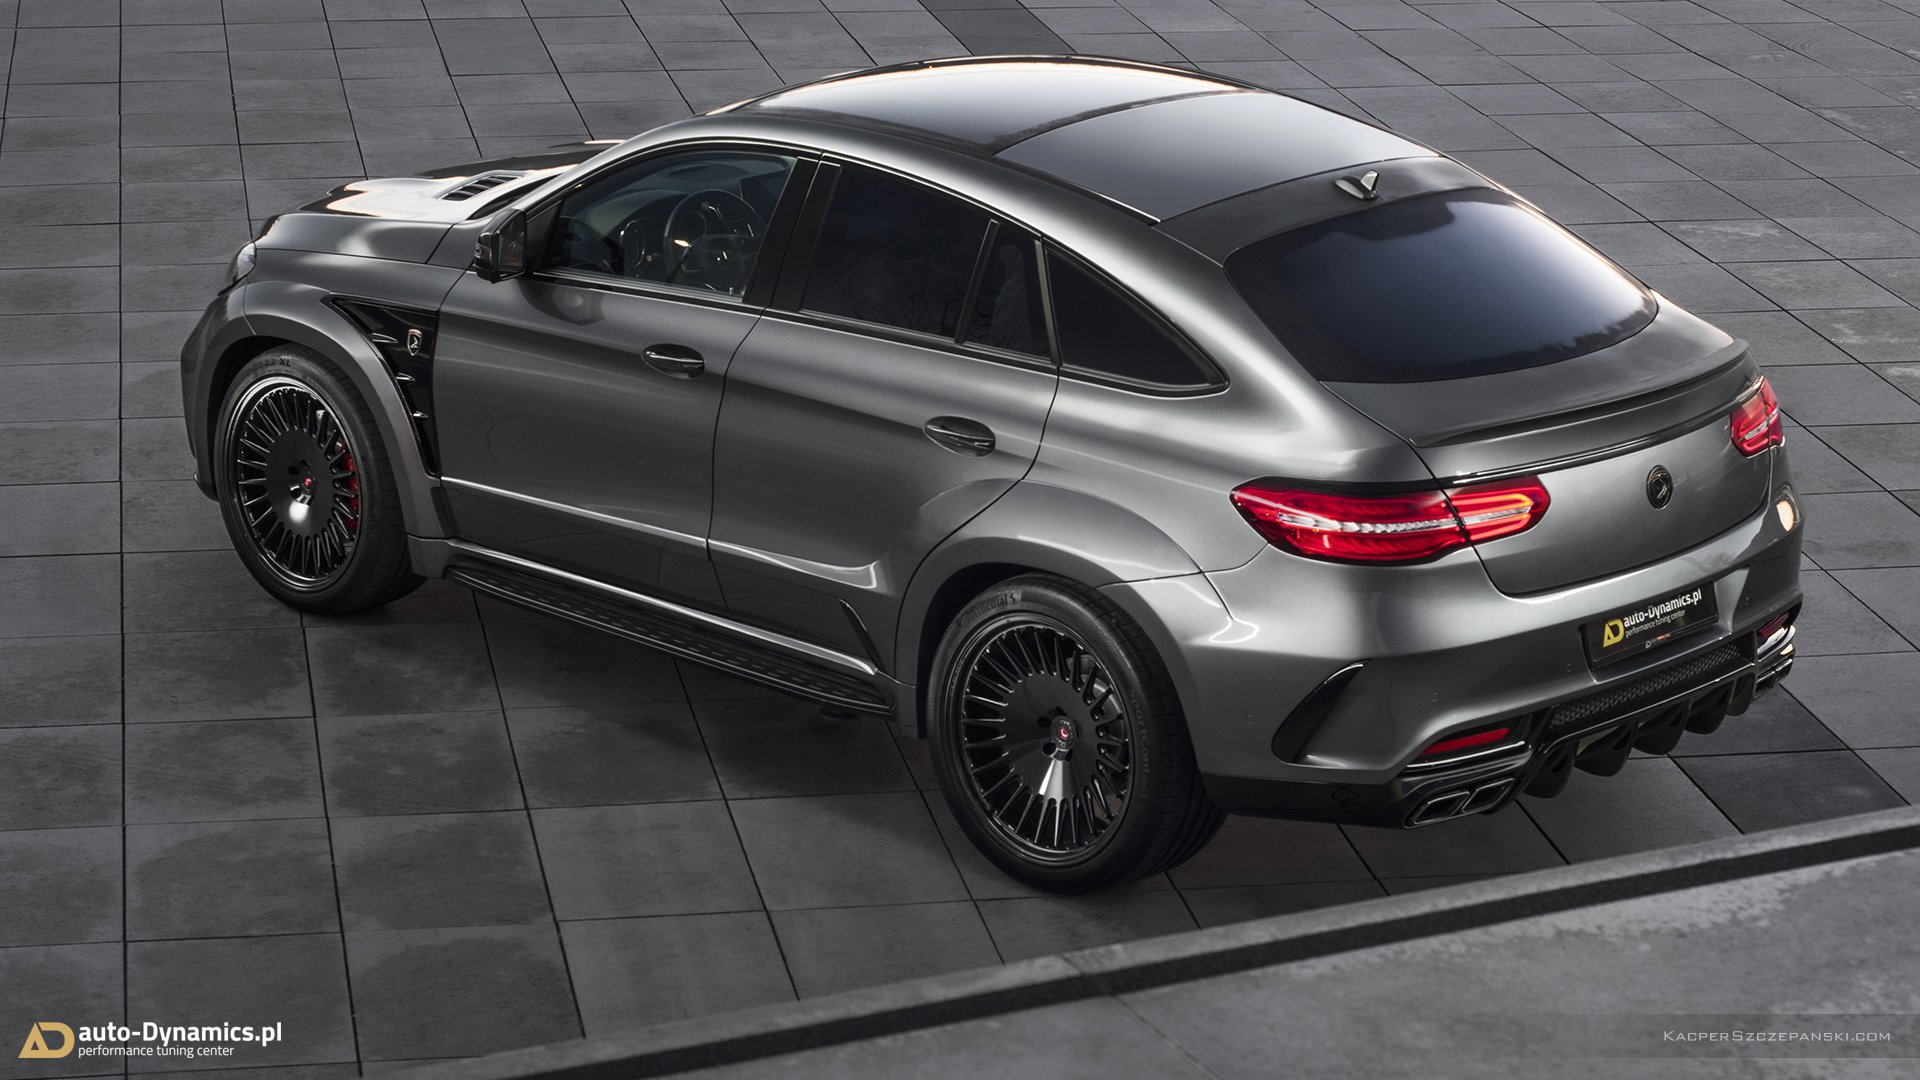 Mercedes-AMG GLE 63S Coupe by AutoDynamics